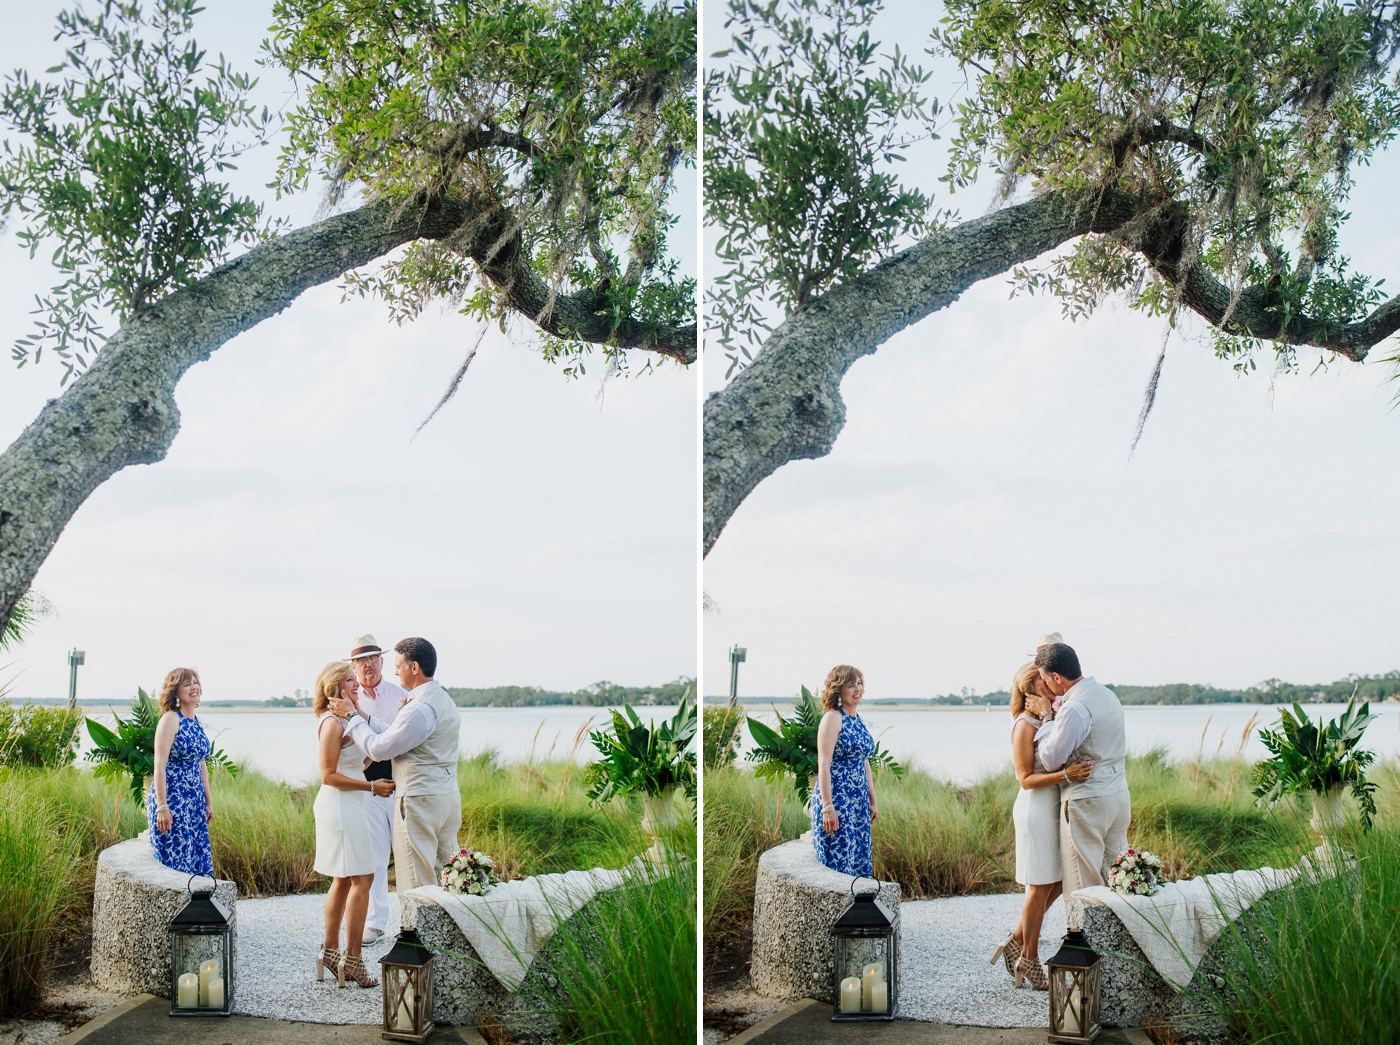 Sunset elopement in Savannah, Georgia at The Landings | Izzy and Co.